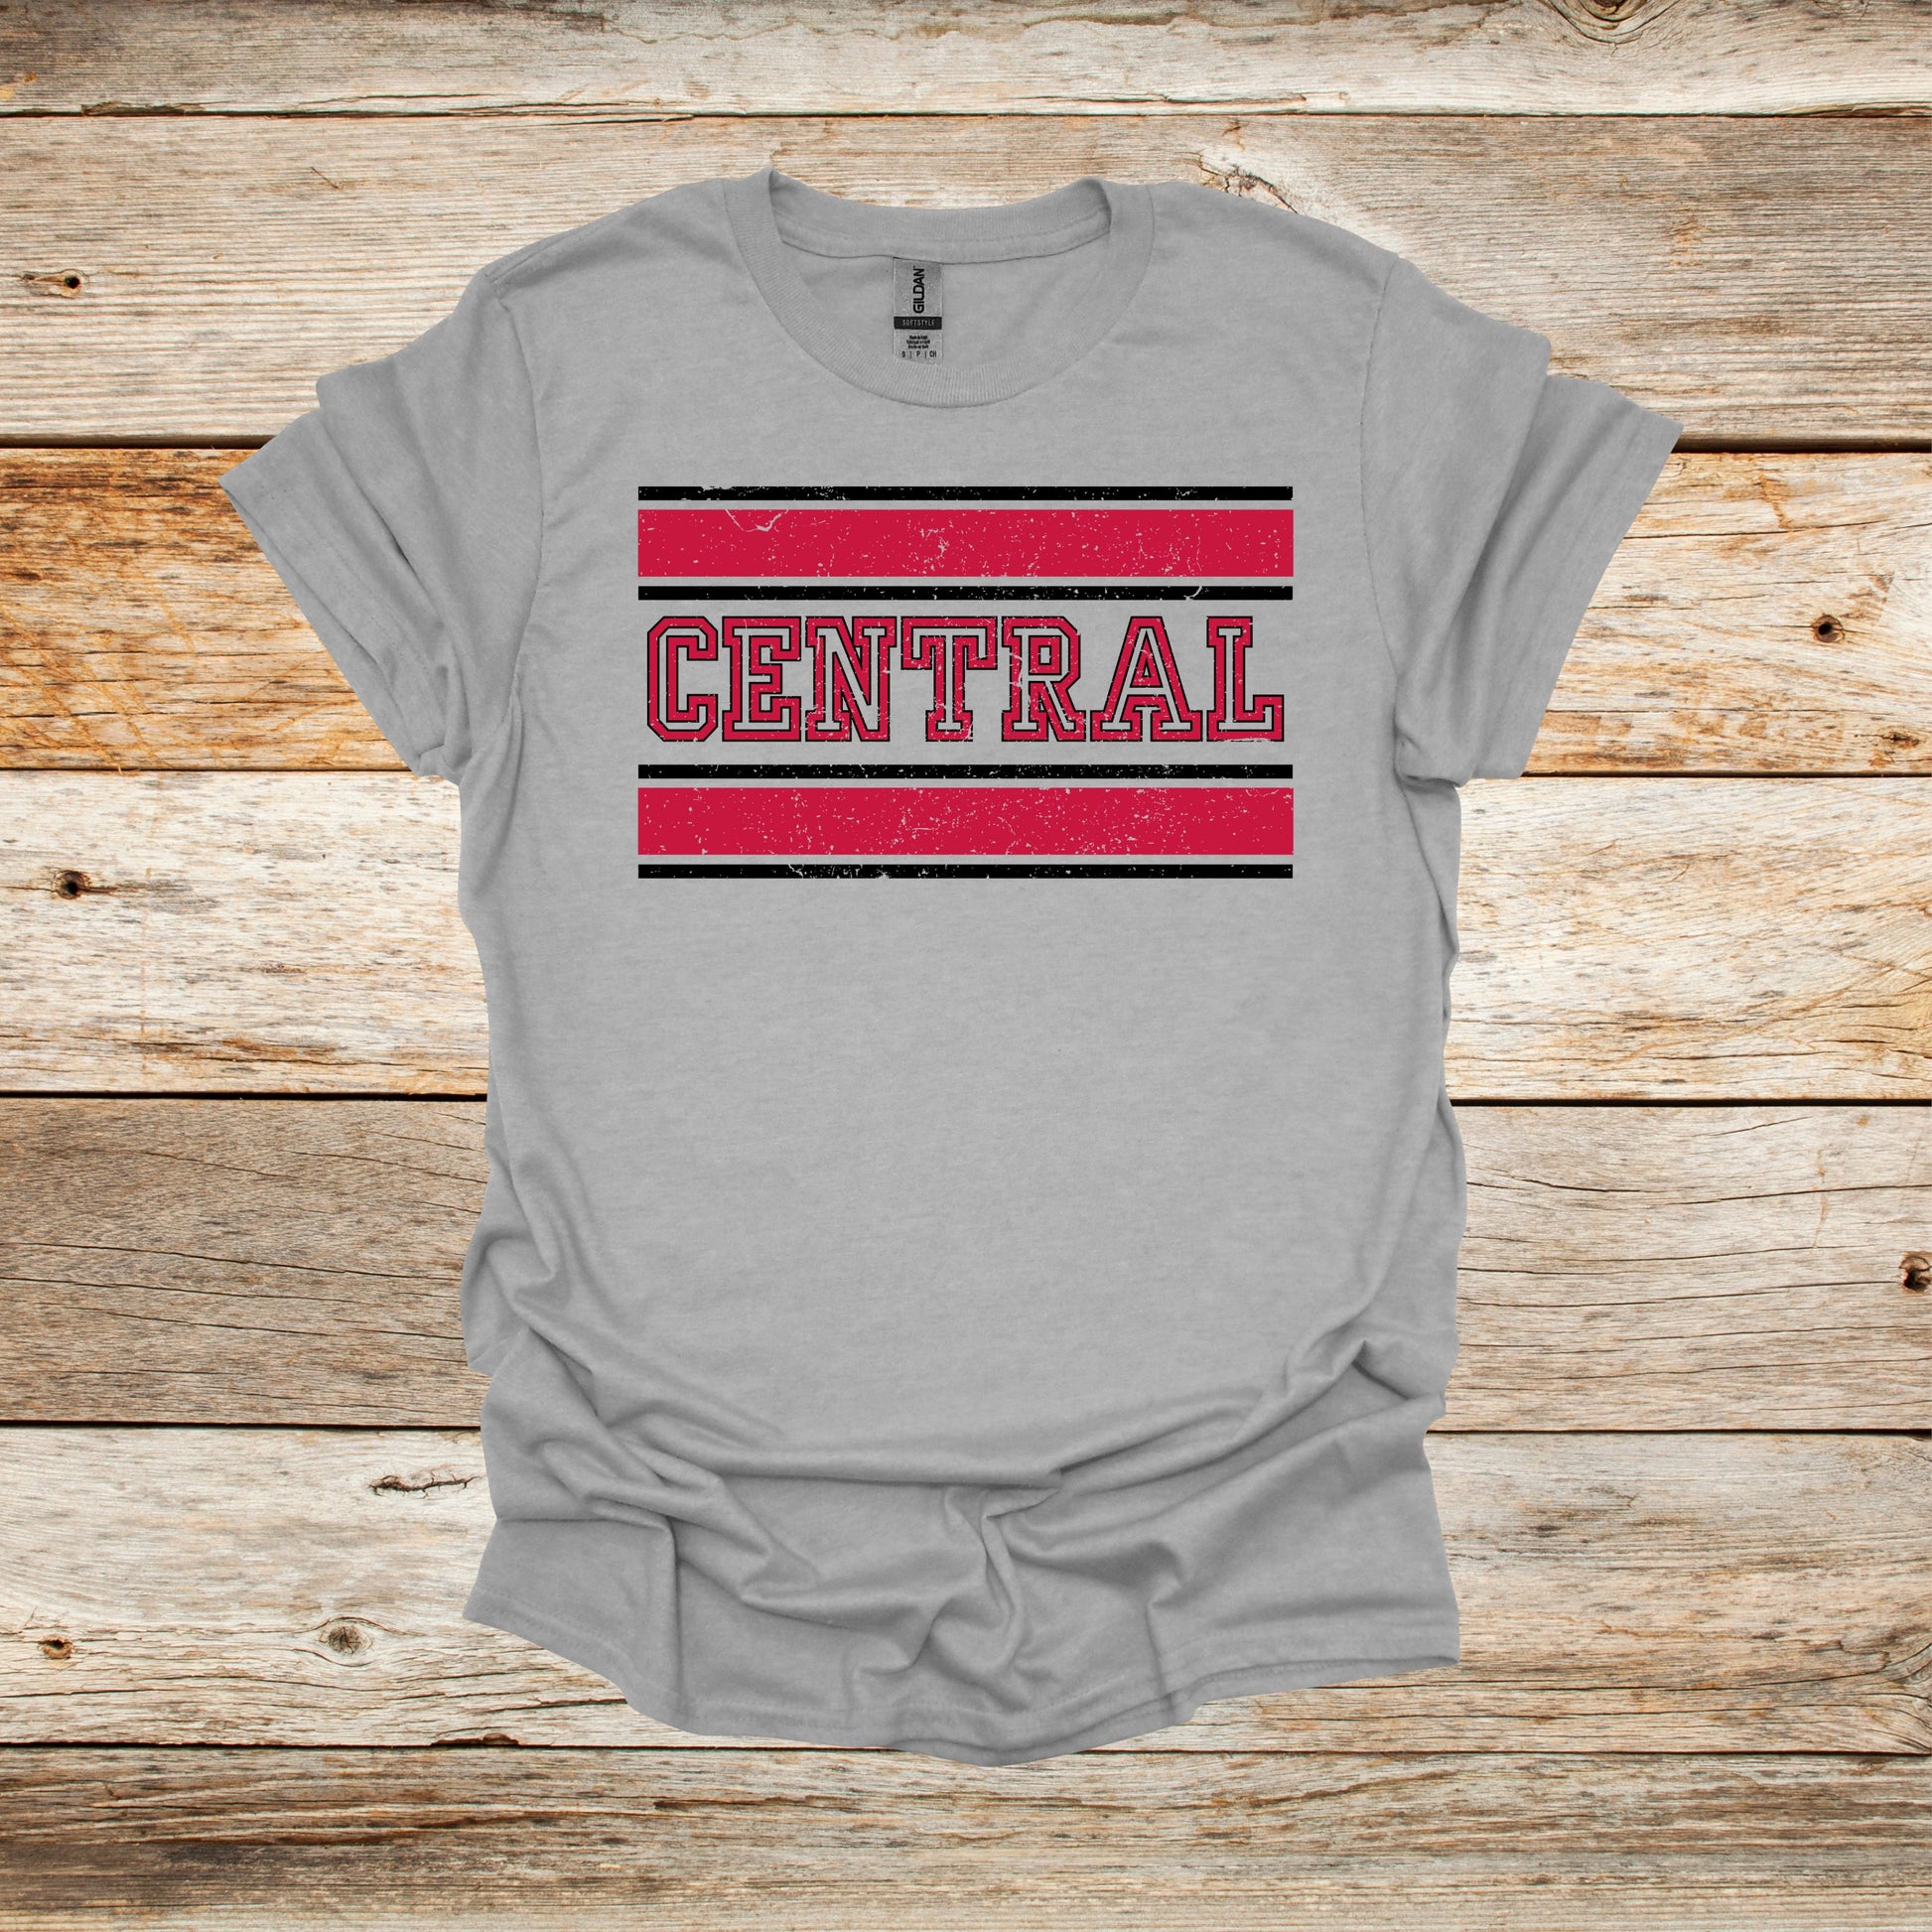 College T Shirt - University of Central Missouri Mules - Adult and Children's Tee Shirts T-Shirts Graphic Avenue Sport Grey Adult Small 